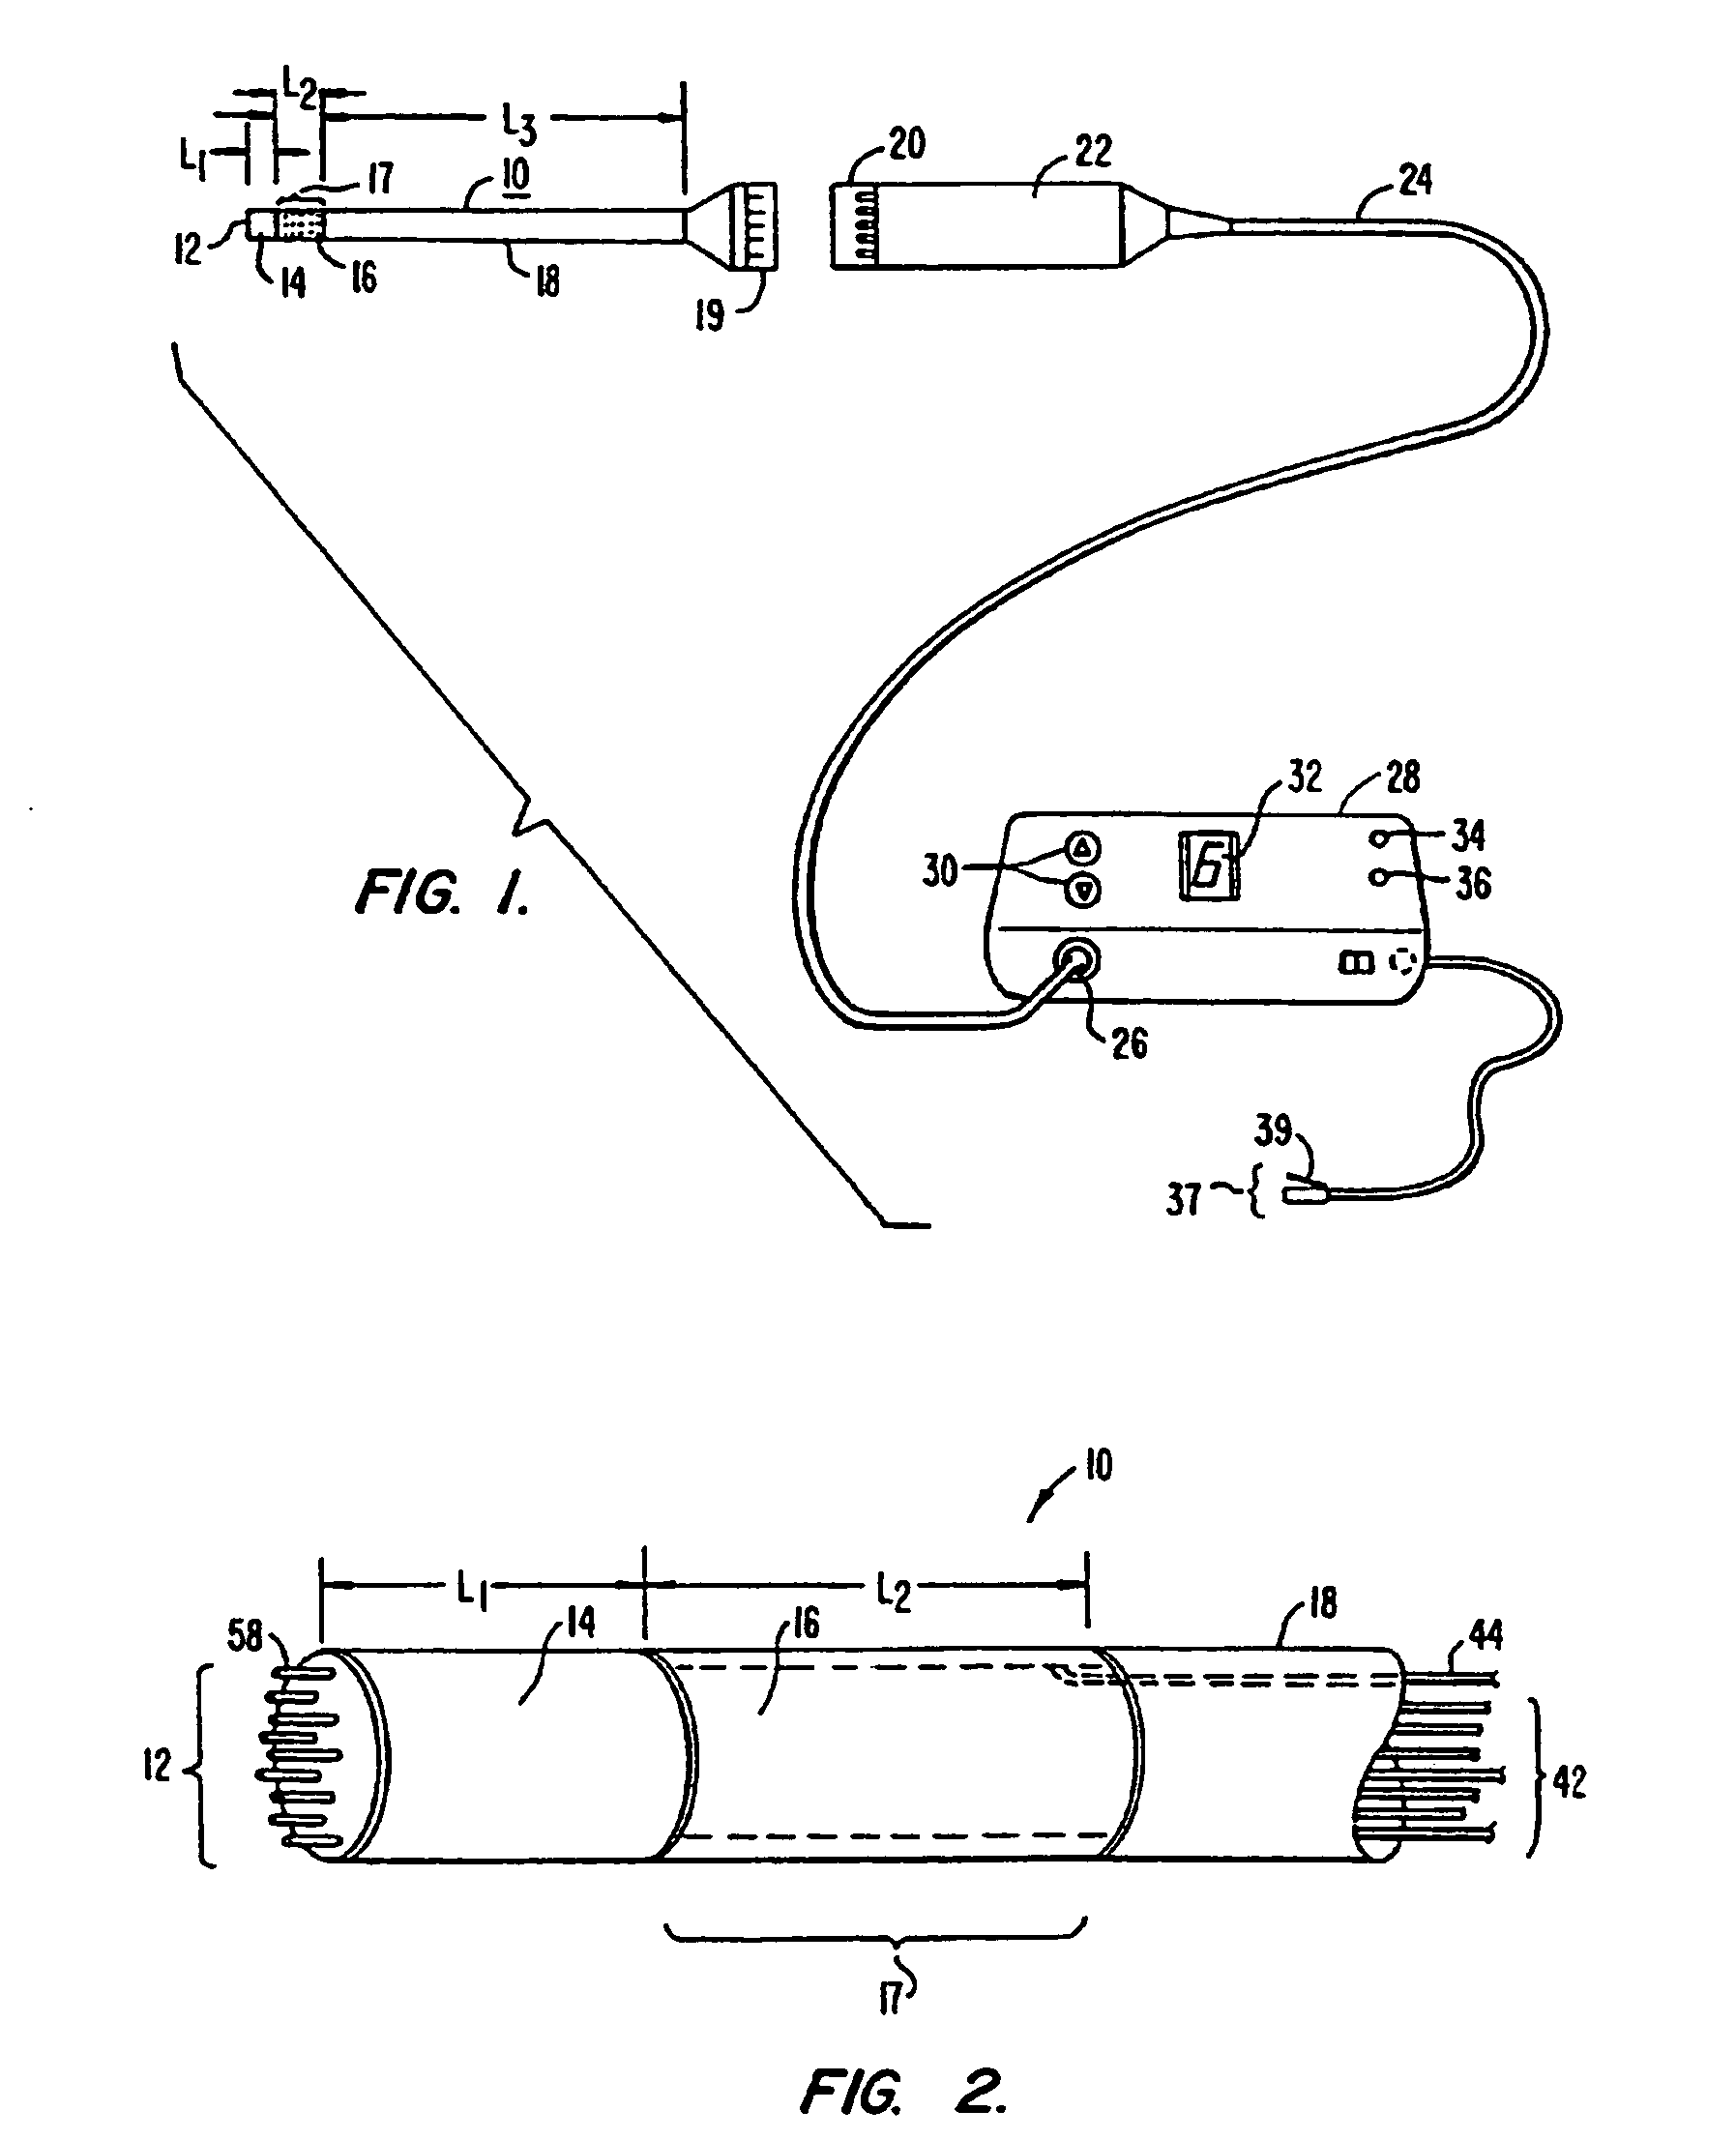 Methods for electrosurgical tissue treatment in electrically conductive fluid